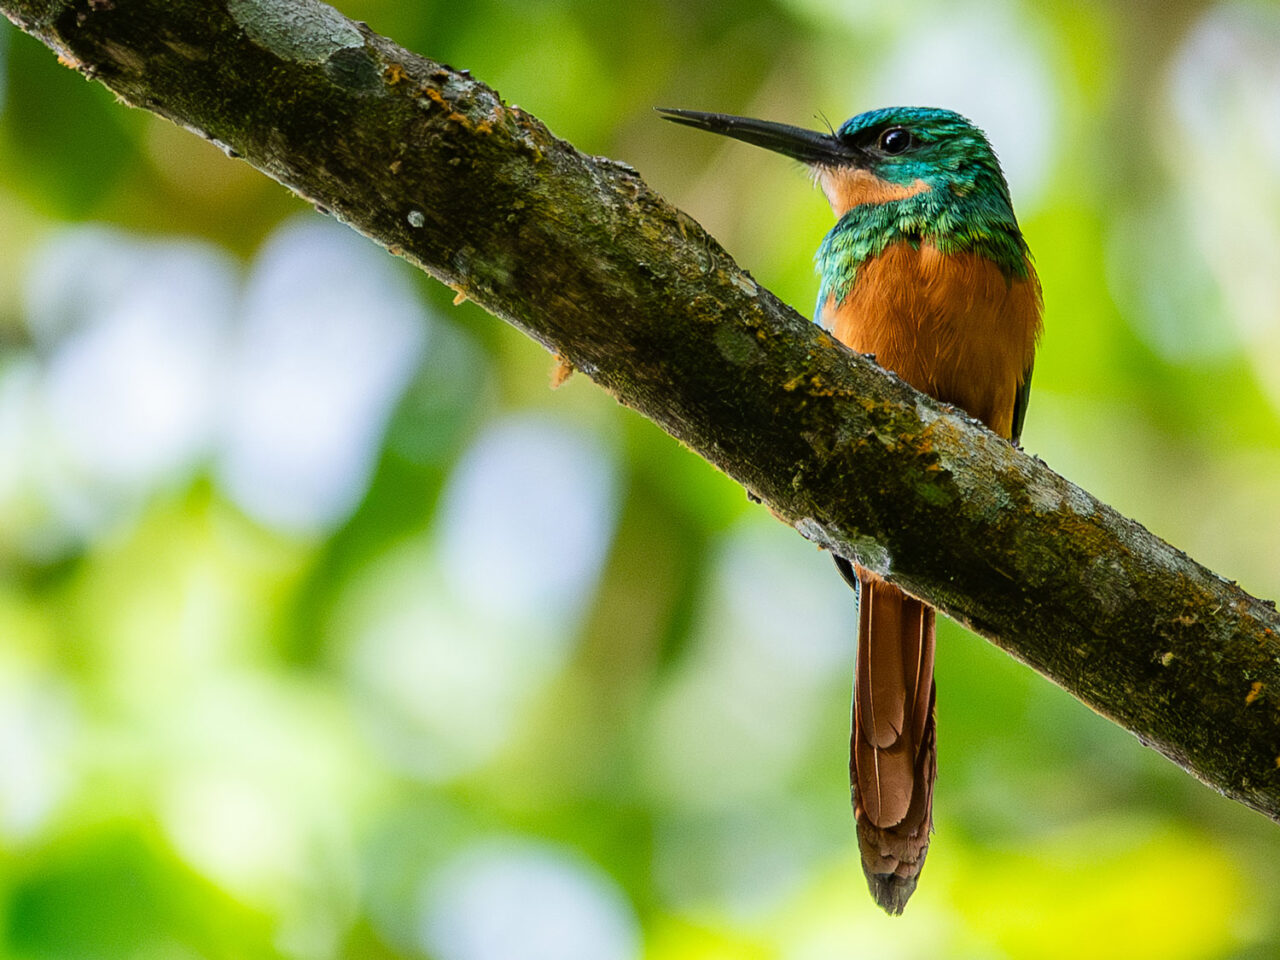 a glittering green and chestnut bird with a long sharp bill and long tail sits on a branch